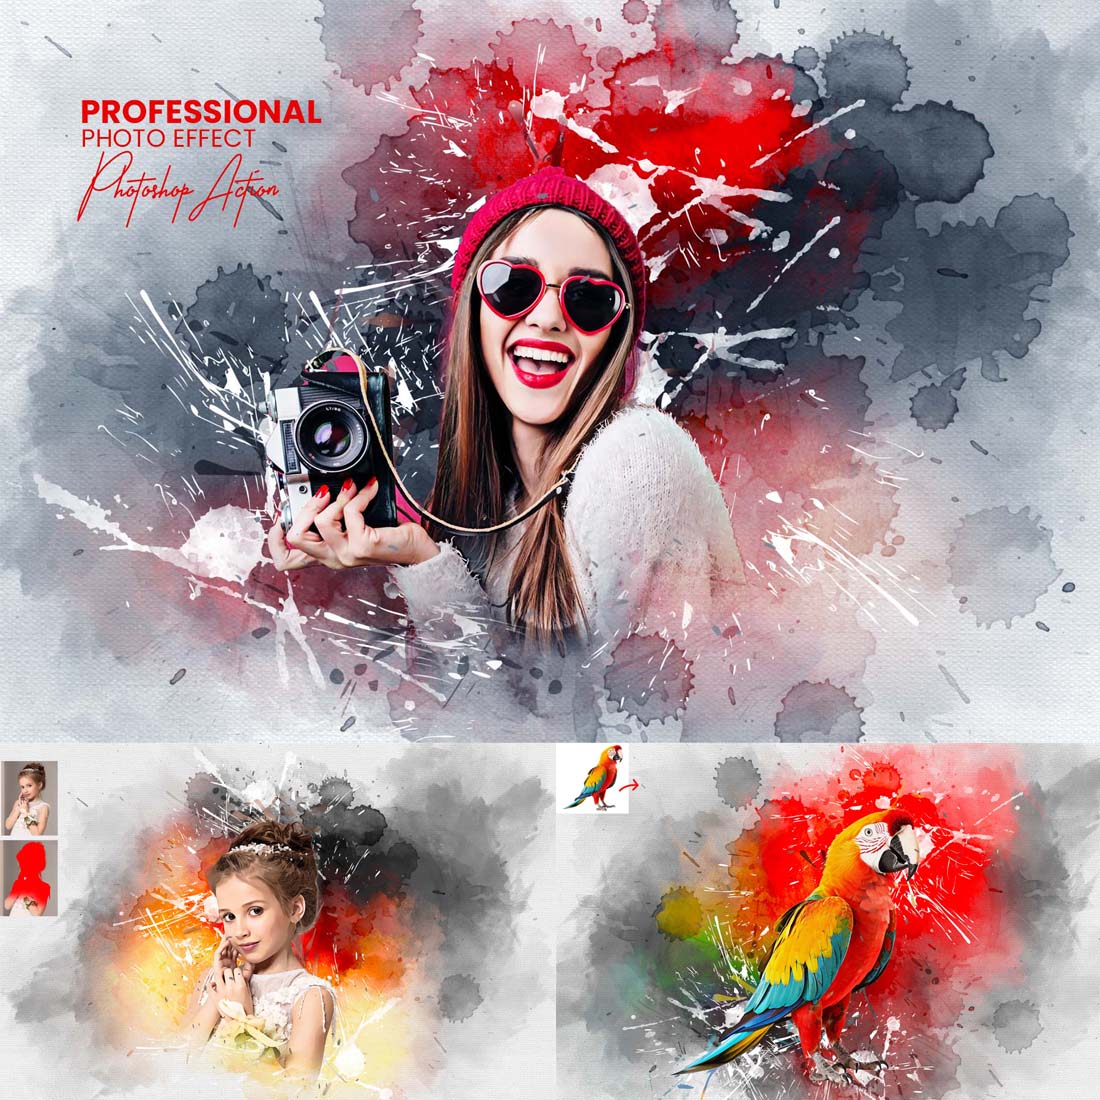 Professional Photoshop Action cover image.